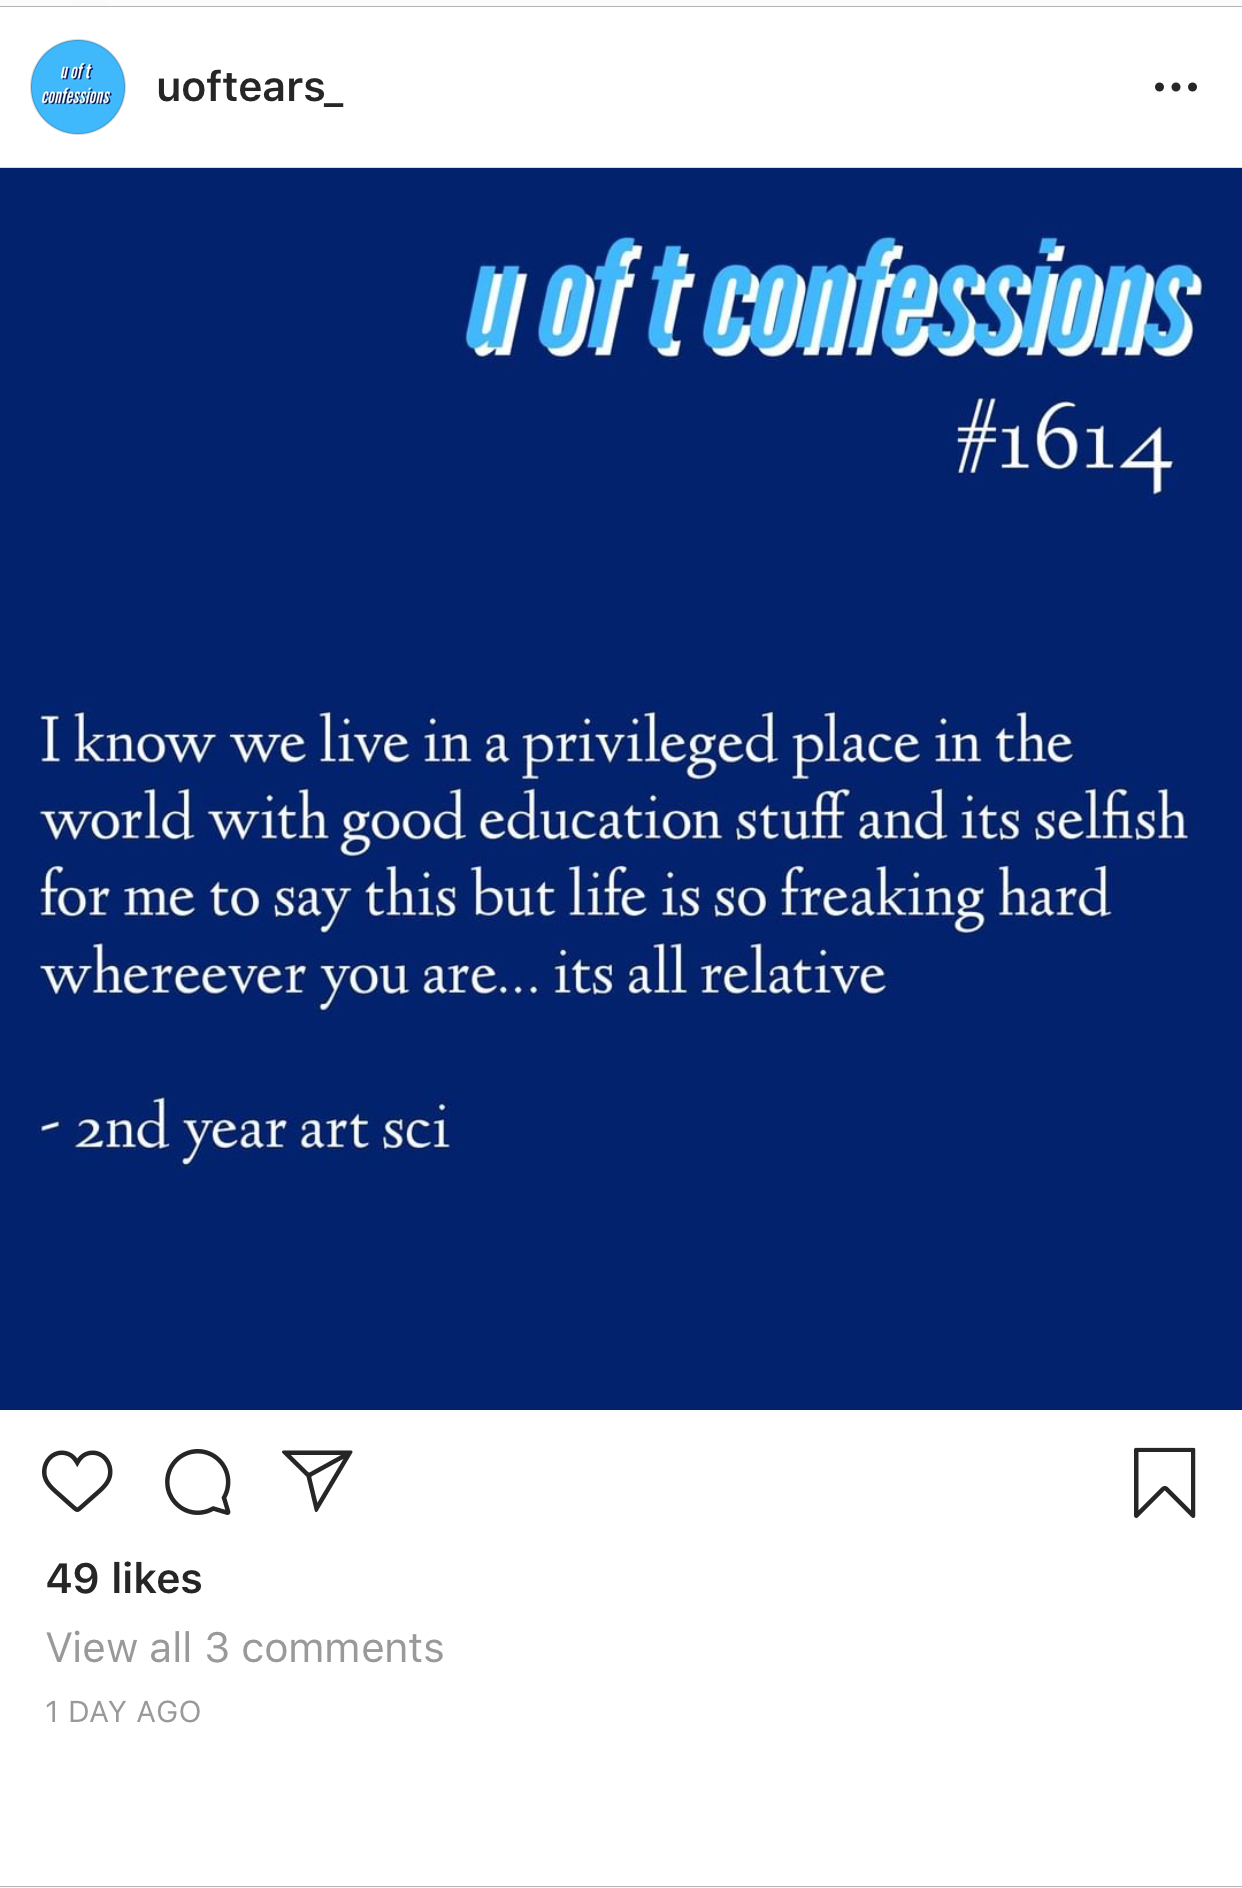 From @uoftears_ on Instagram. Reads: "UofT Confessions: I know we live in a super privileged place in the world with good education and stuff and its selfish for me to say this but life is so freaking hard wherever you are...its all relative - Second year ast sci"